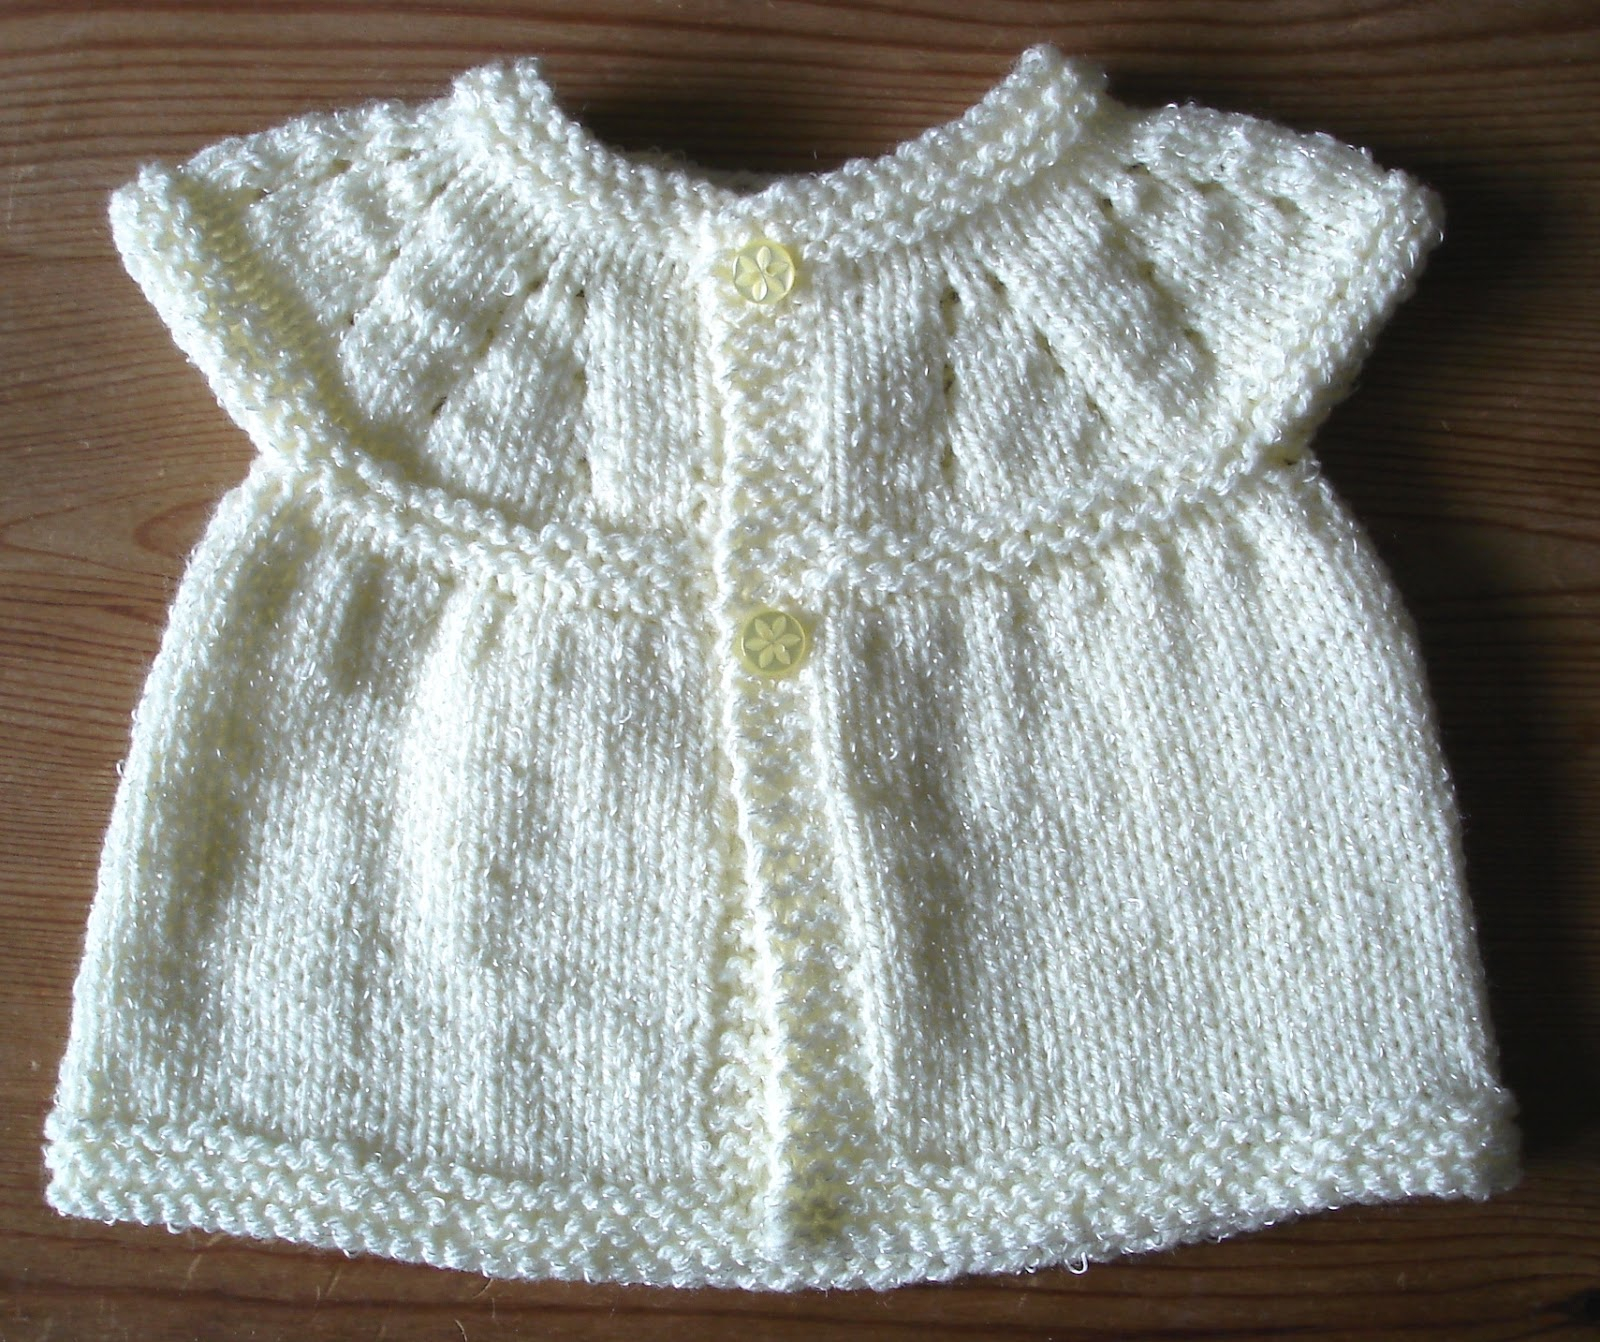 Free Knitting Patterns For Sweater Coats Free Knitting Patterns For Newborn Sweaters